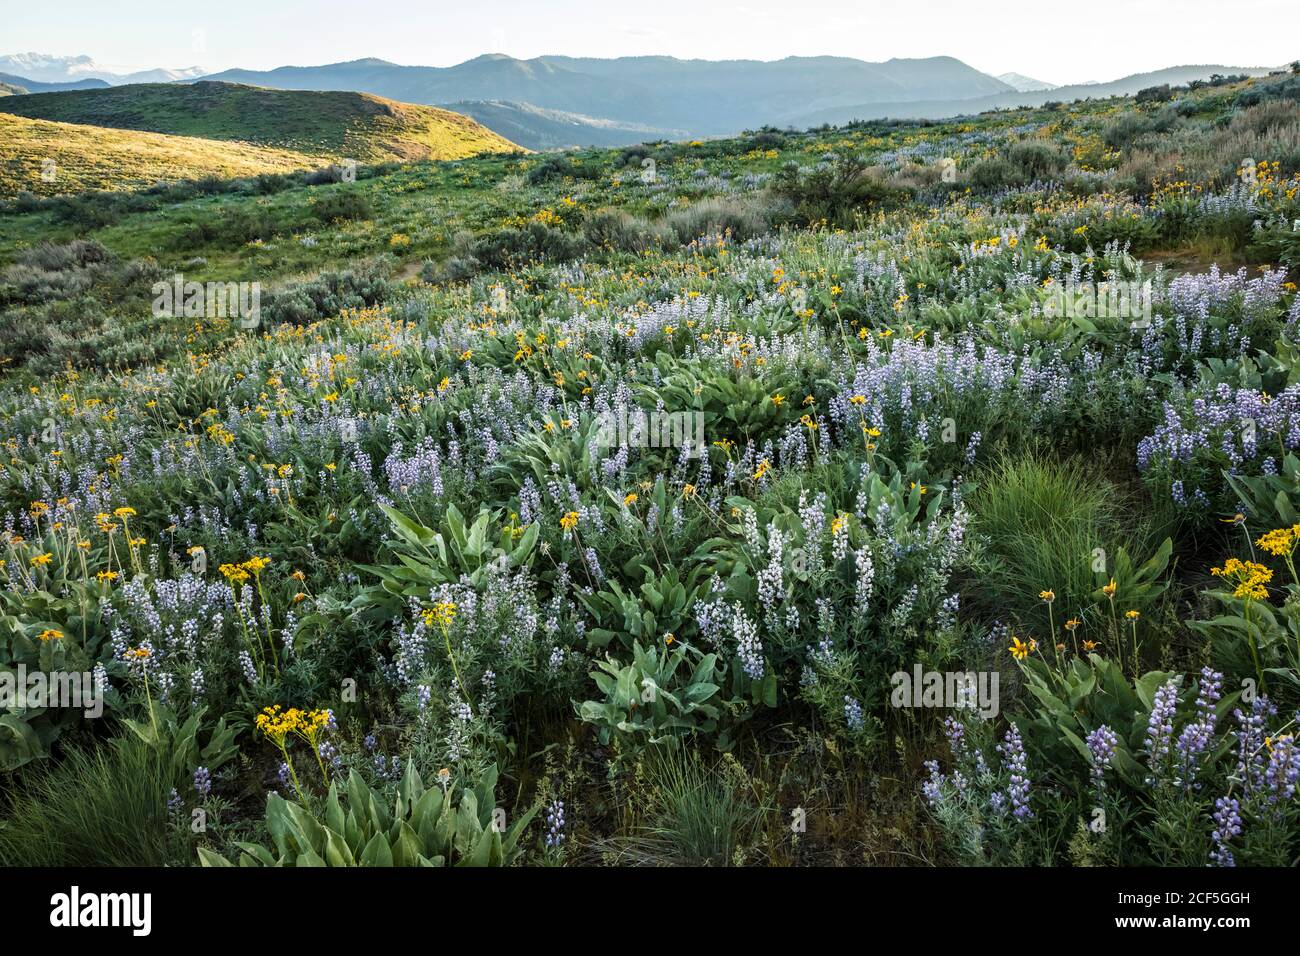 Grass and lupine cover the hillside in Spring along Lewis Butte trail in the Methow Valley outside Winthrop, Washington. Stock Photo